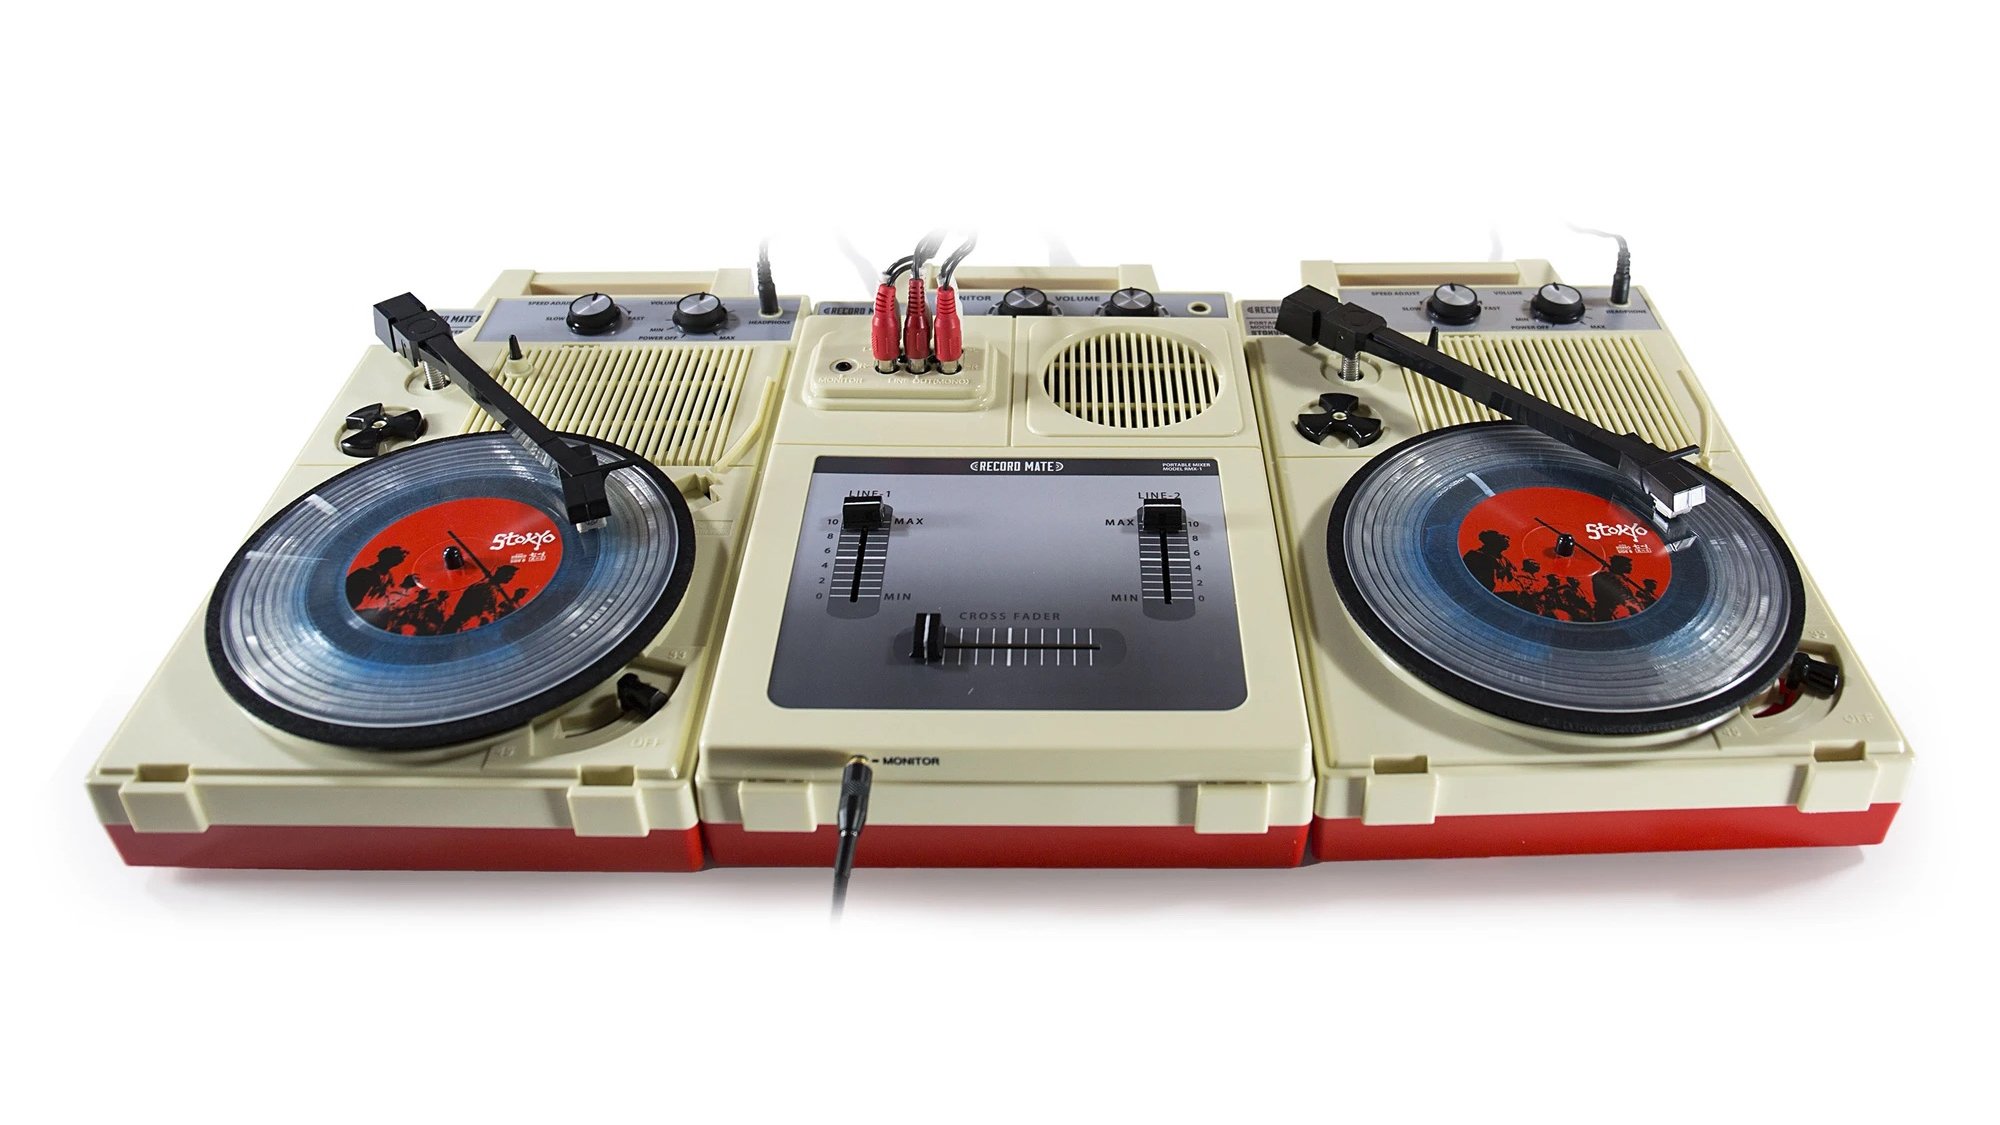 Japanese manufacturer Stokyo reveals portable 'Complete DJ Set' with turntables and mixer image